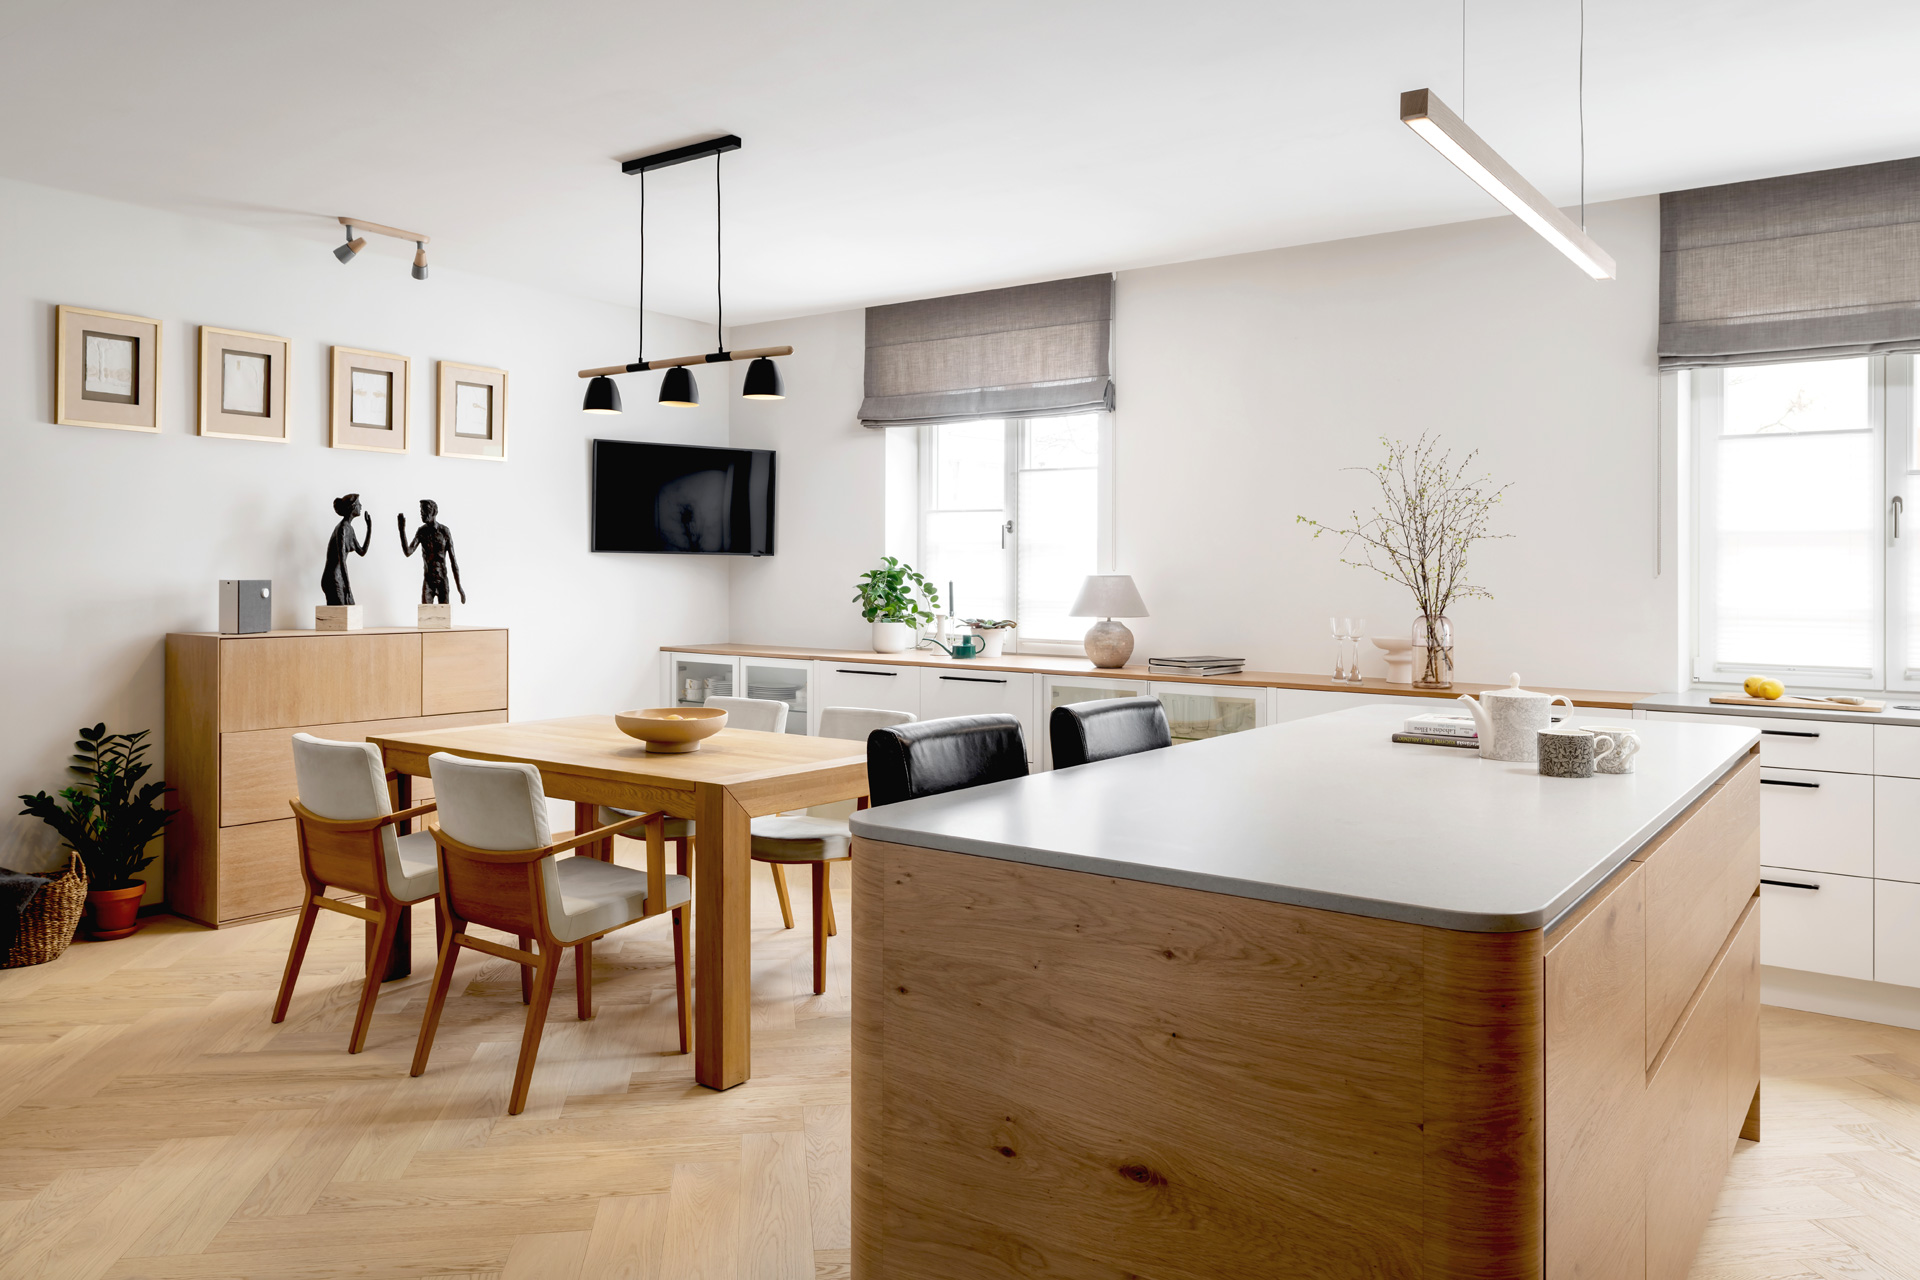 Hanák Furniture Customized interior Kitchens with rounded lines